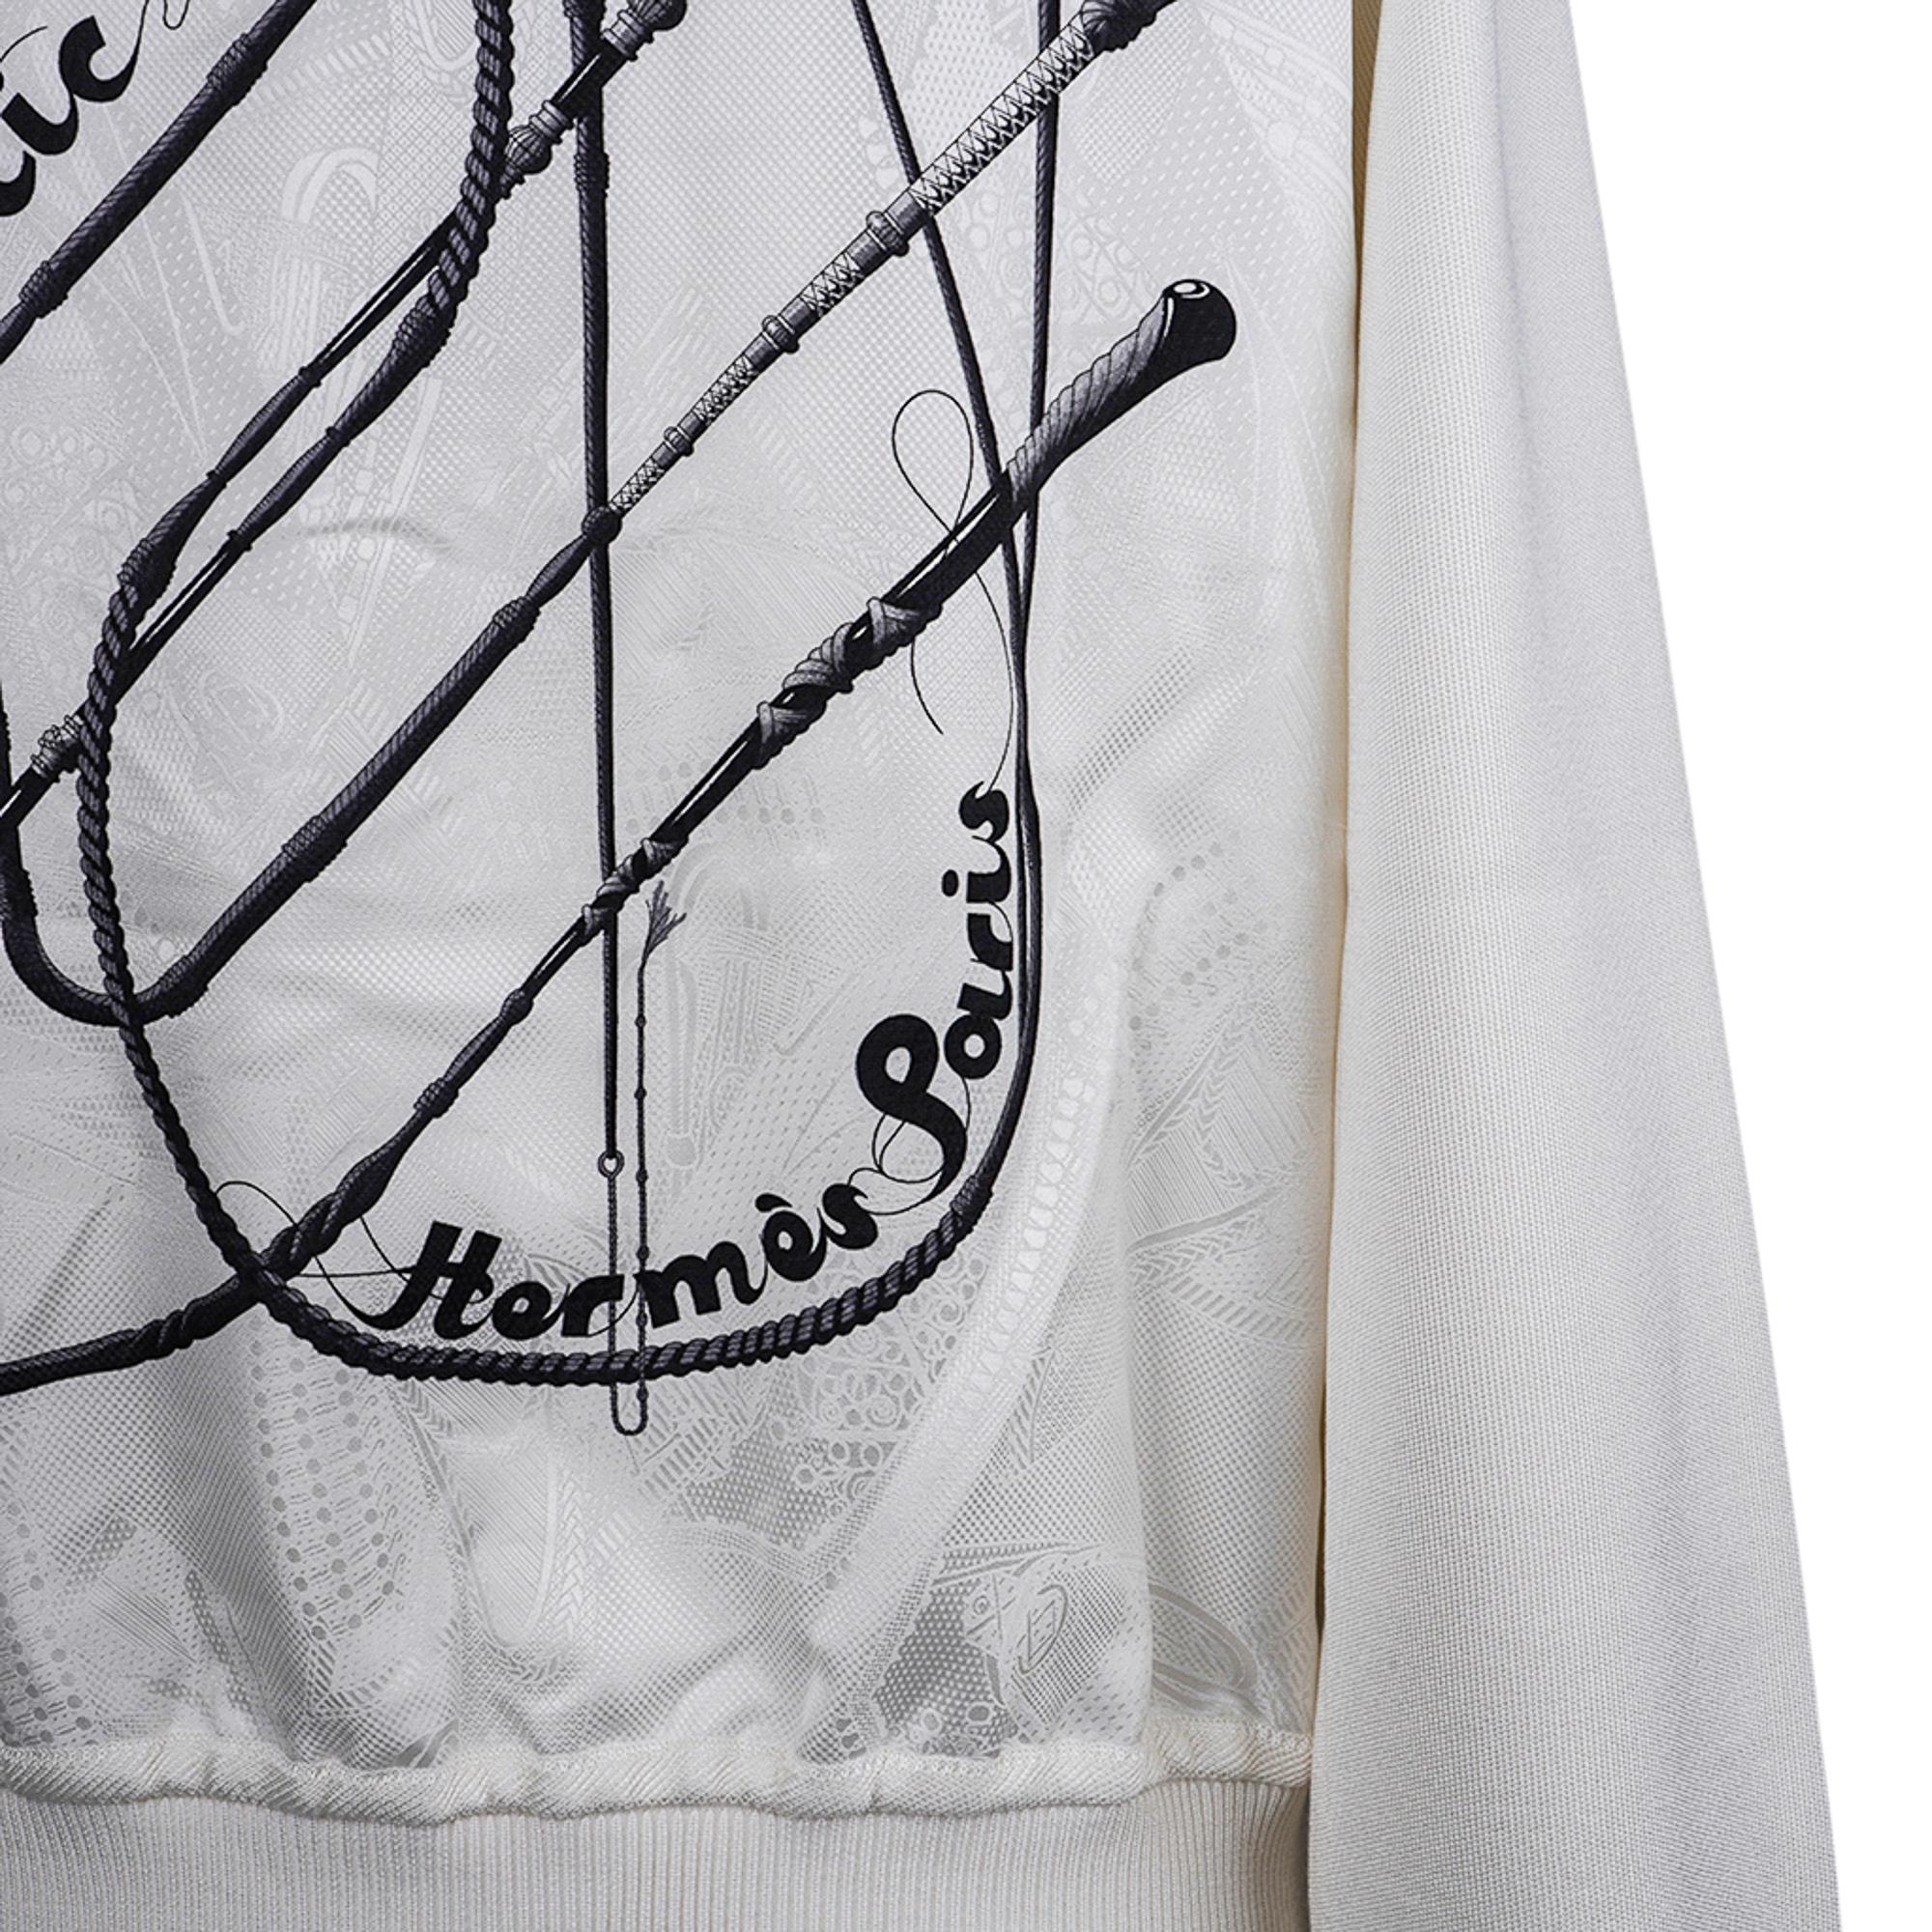 Hermes Cardigan Zip Clic Clac Winter White Jacket 38 / 6 In New Condition For Sale In Miami, FL